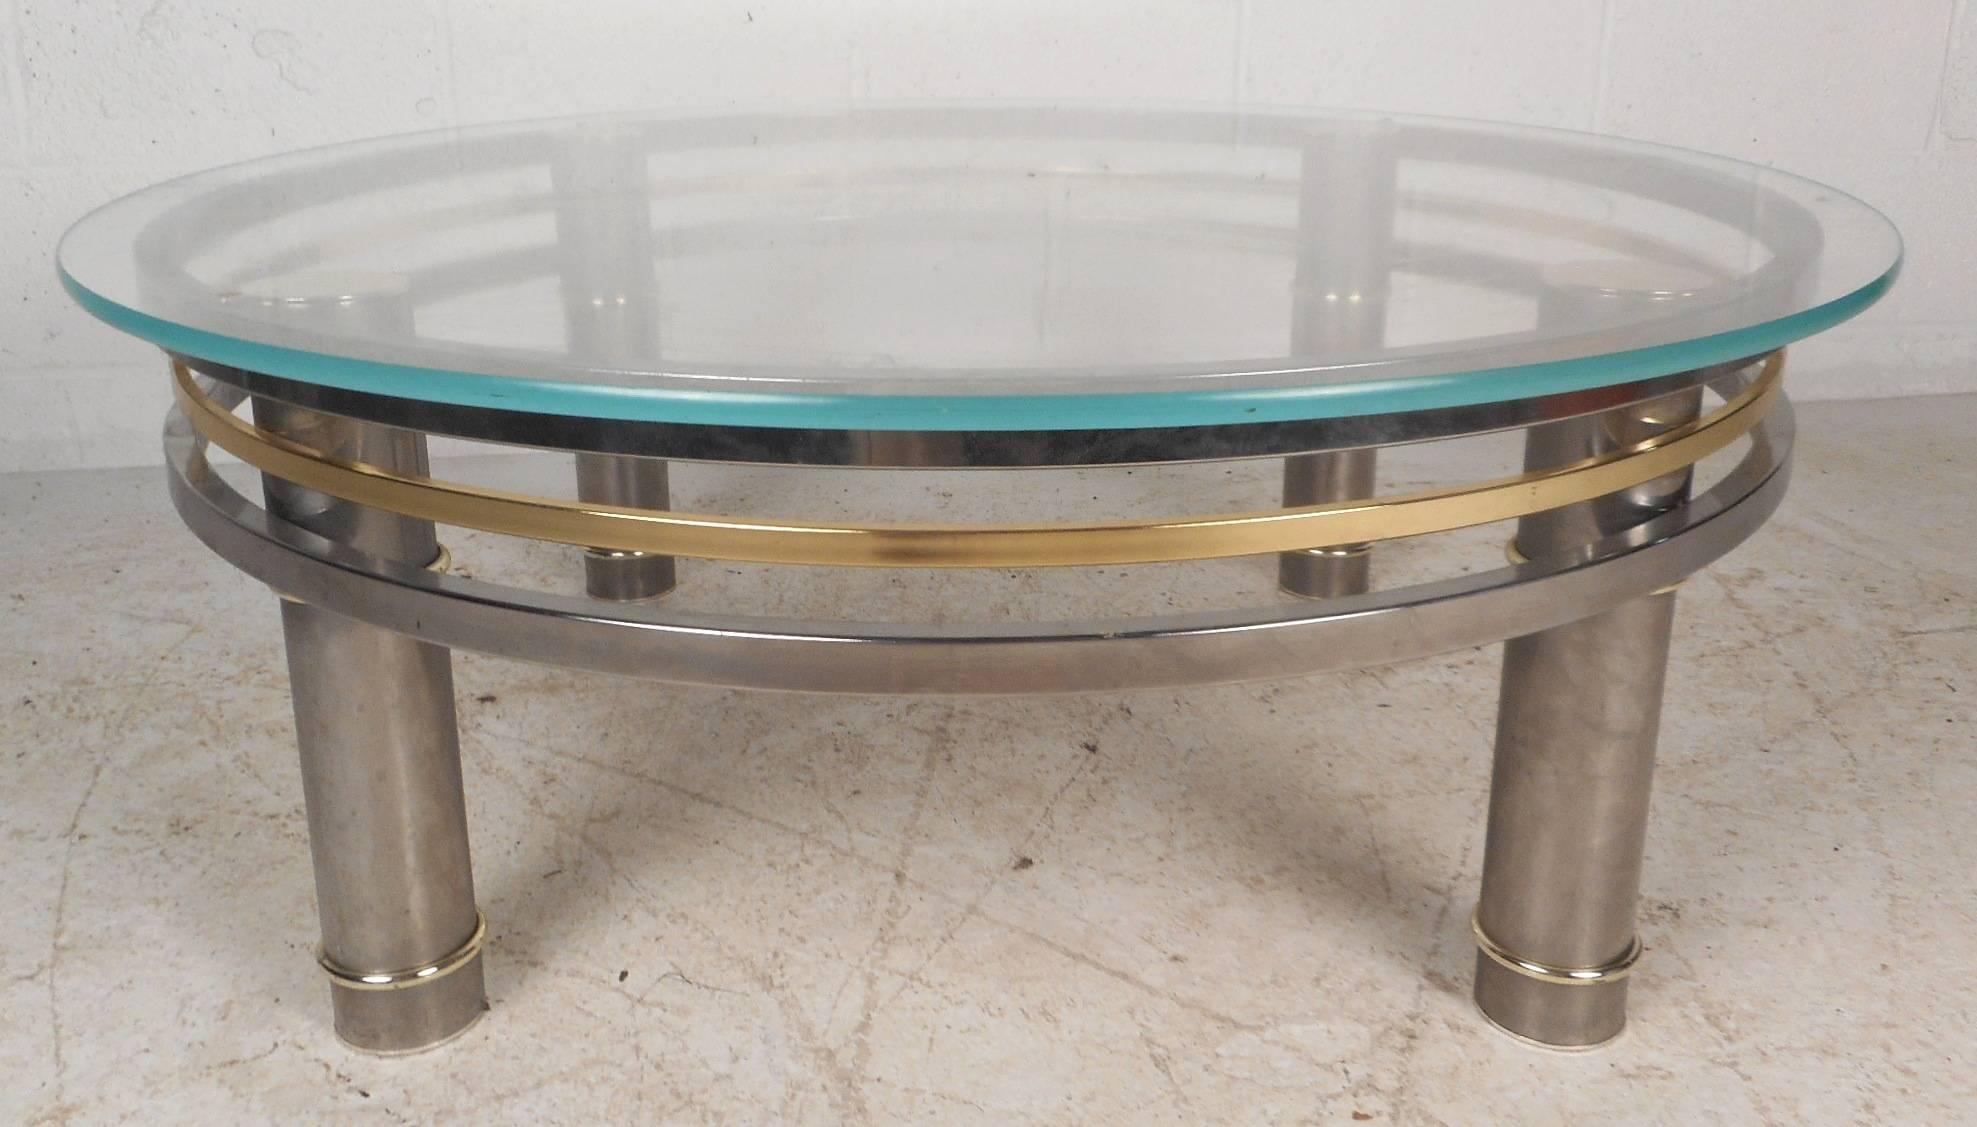 This elegant vintage modern coffee table features four thick cylindrical chrome legs with wraparound brass and chrome stretchers. Sleek design has a thick glass top with a light tint of green. Unique two-tone piece provides a sturdy and stylish